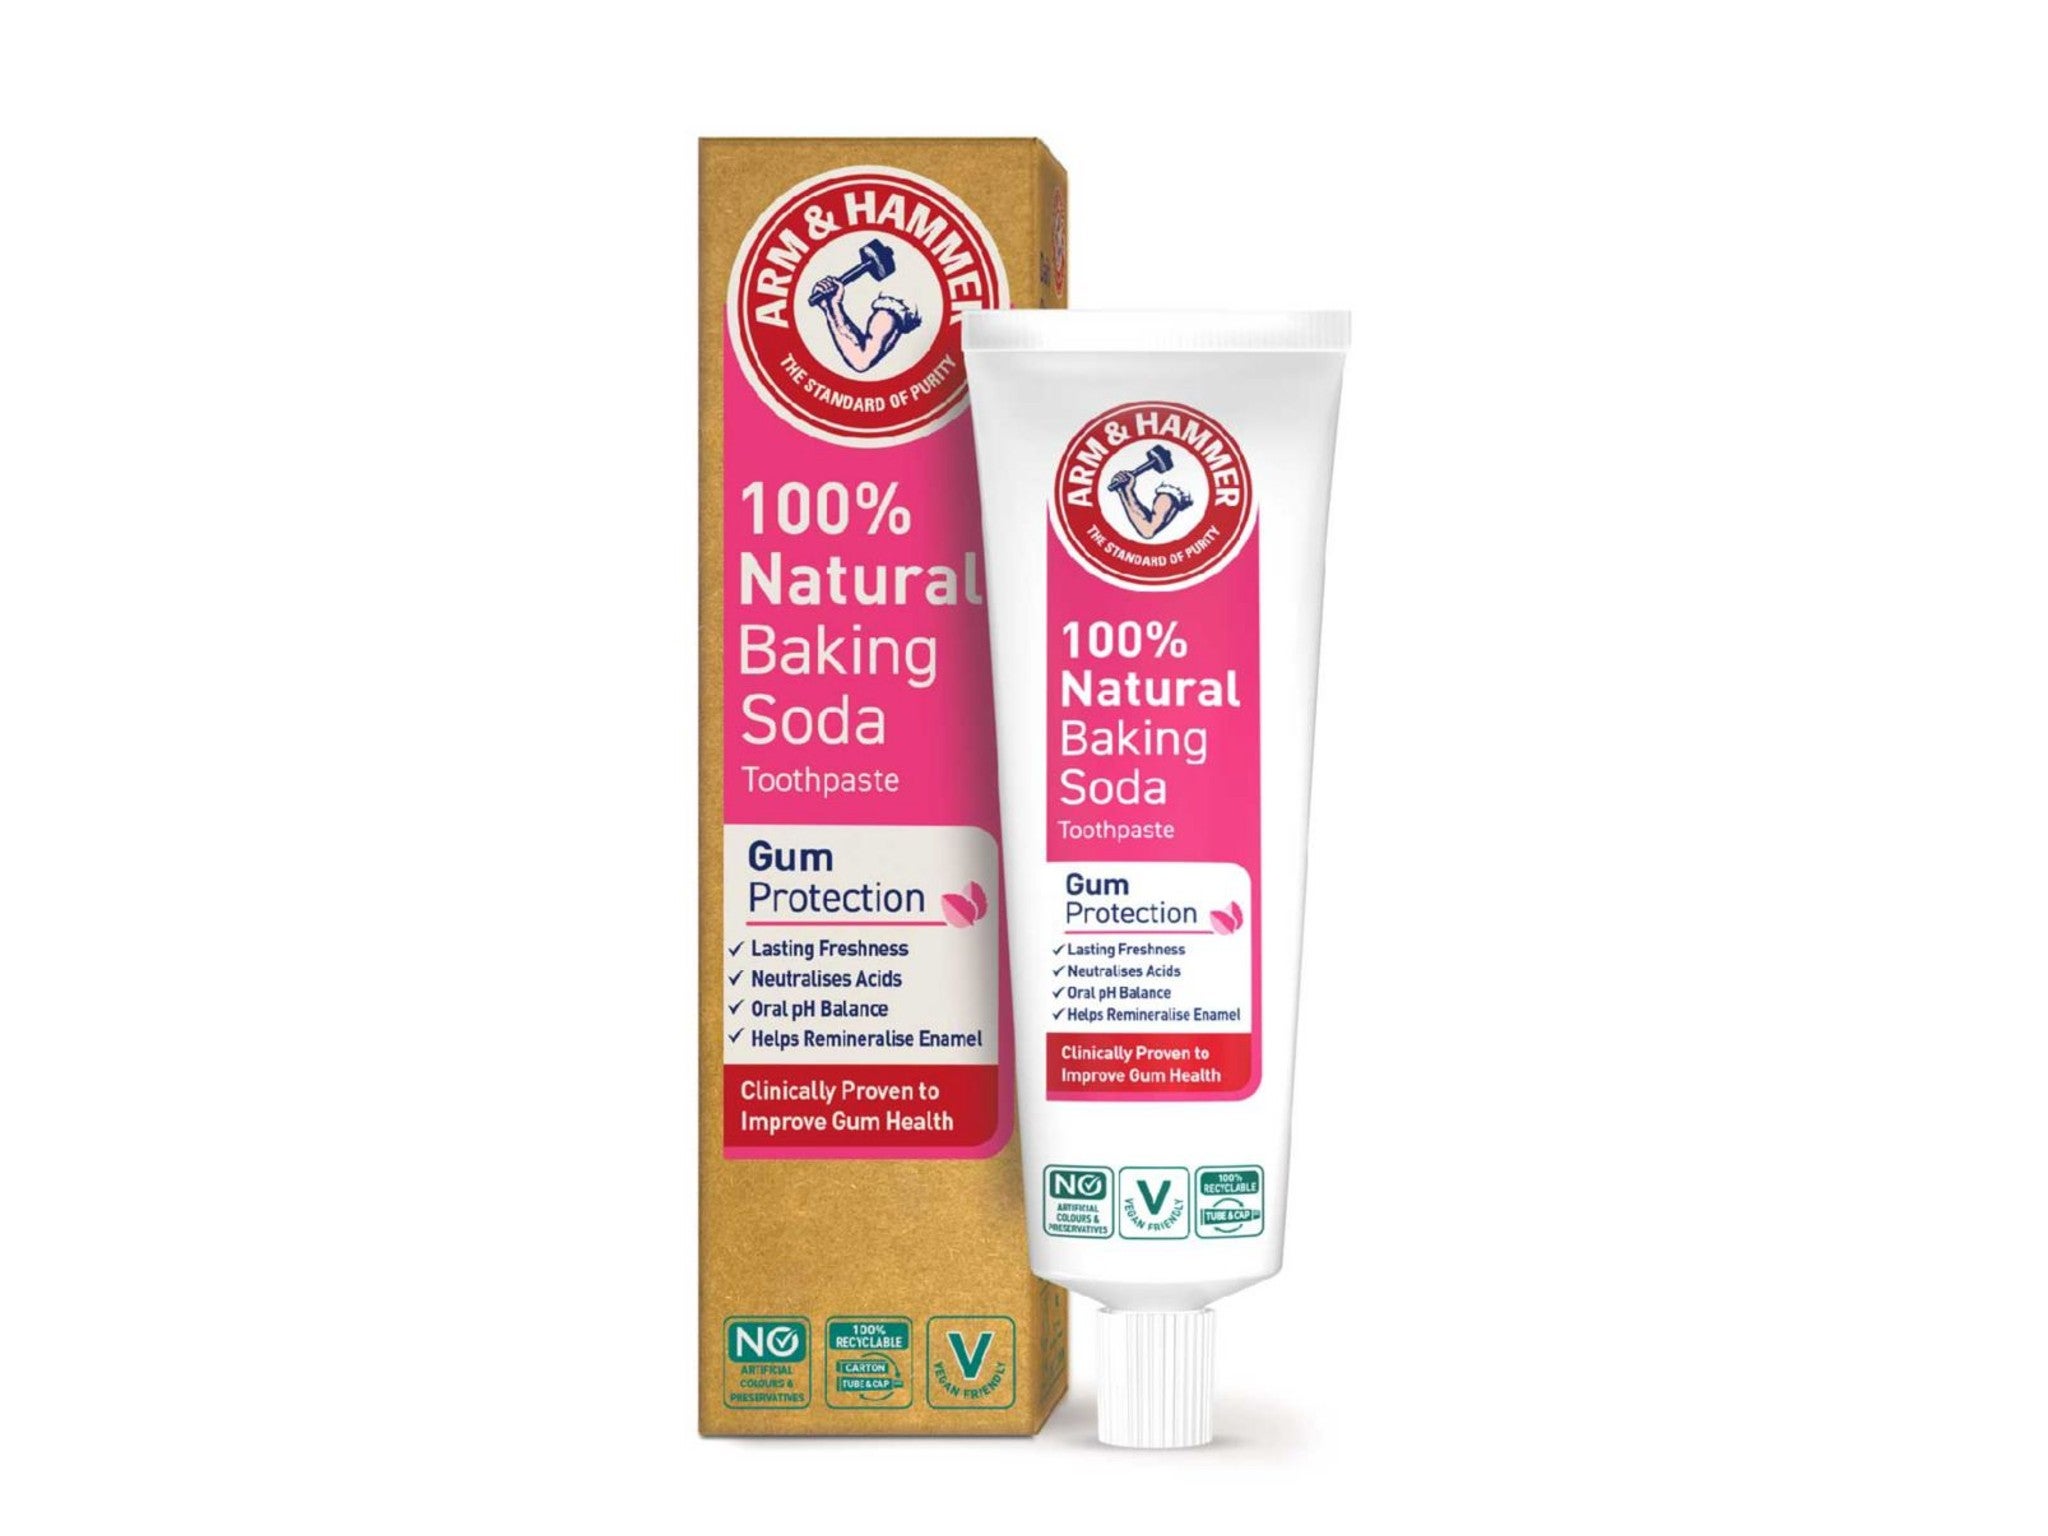 Arm & Hammer 100% natural gum protection toothpaste indybest.jpg